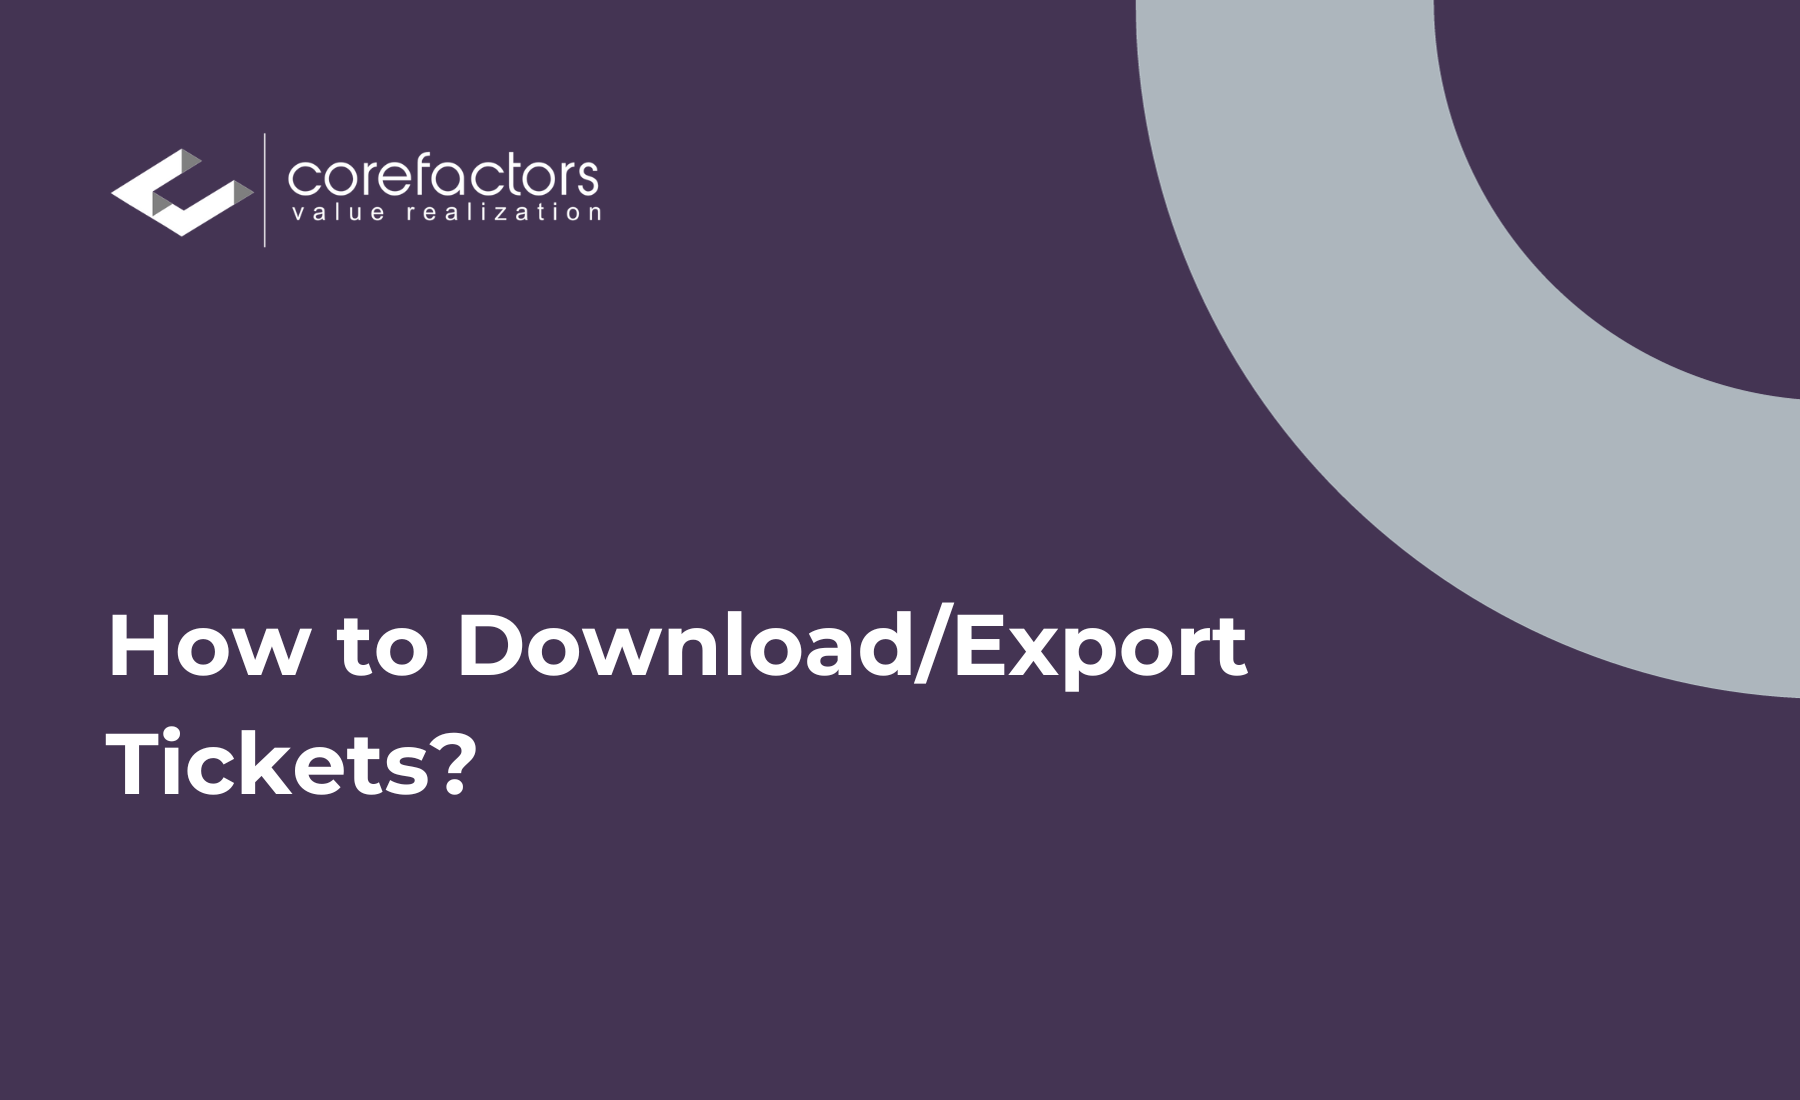 How to download or export tickets from the Corefactors CRM?